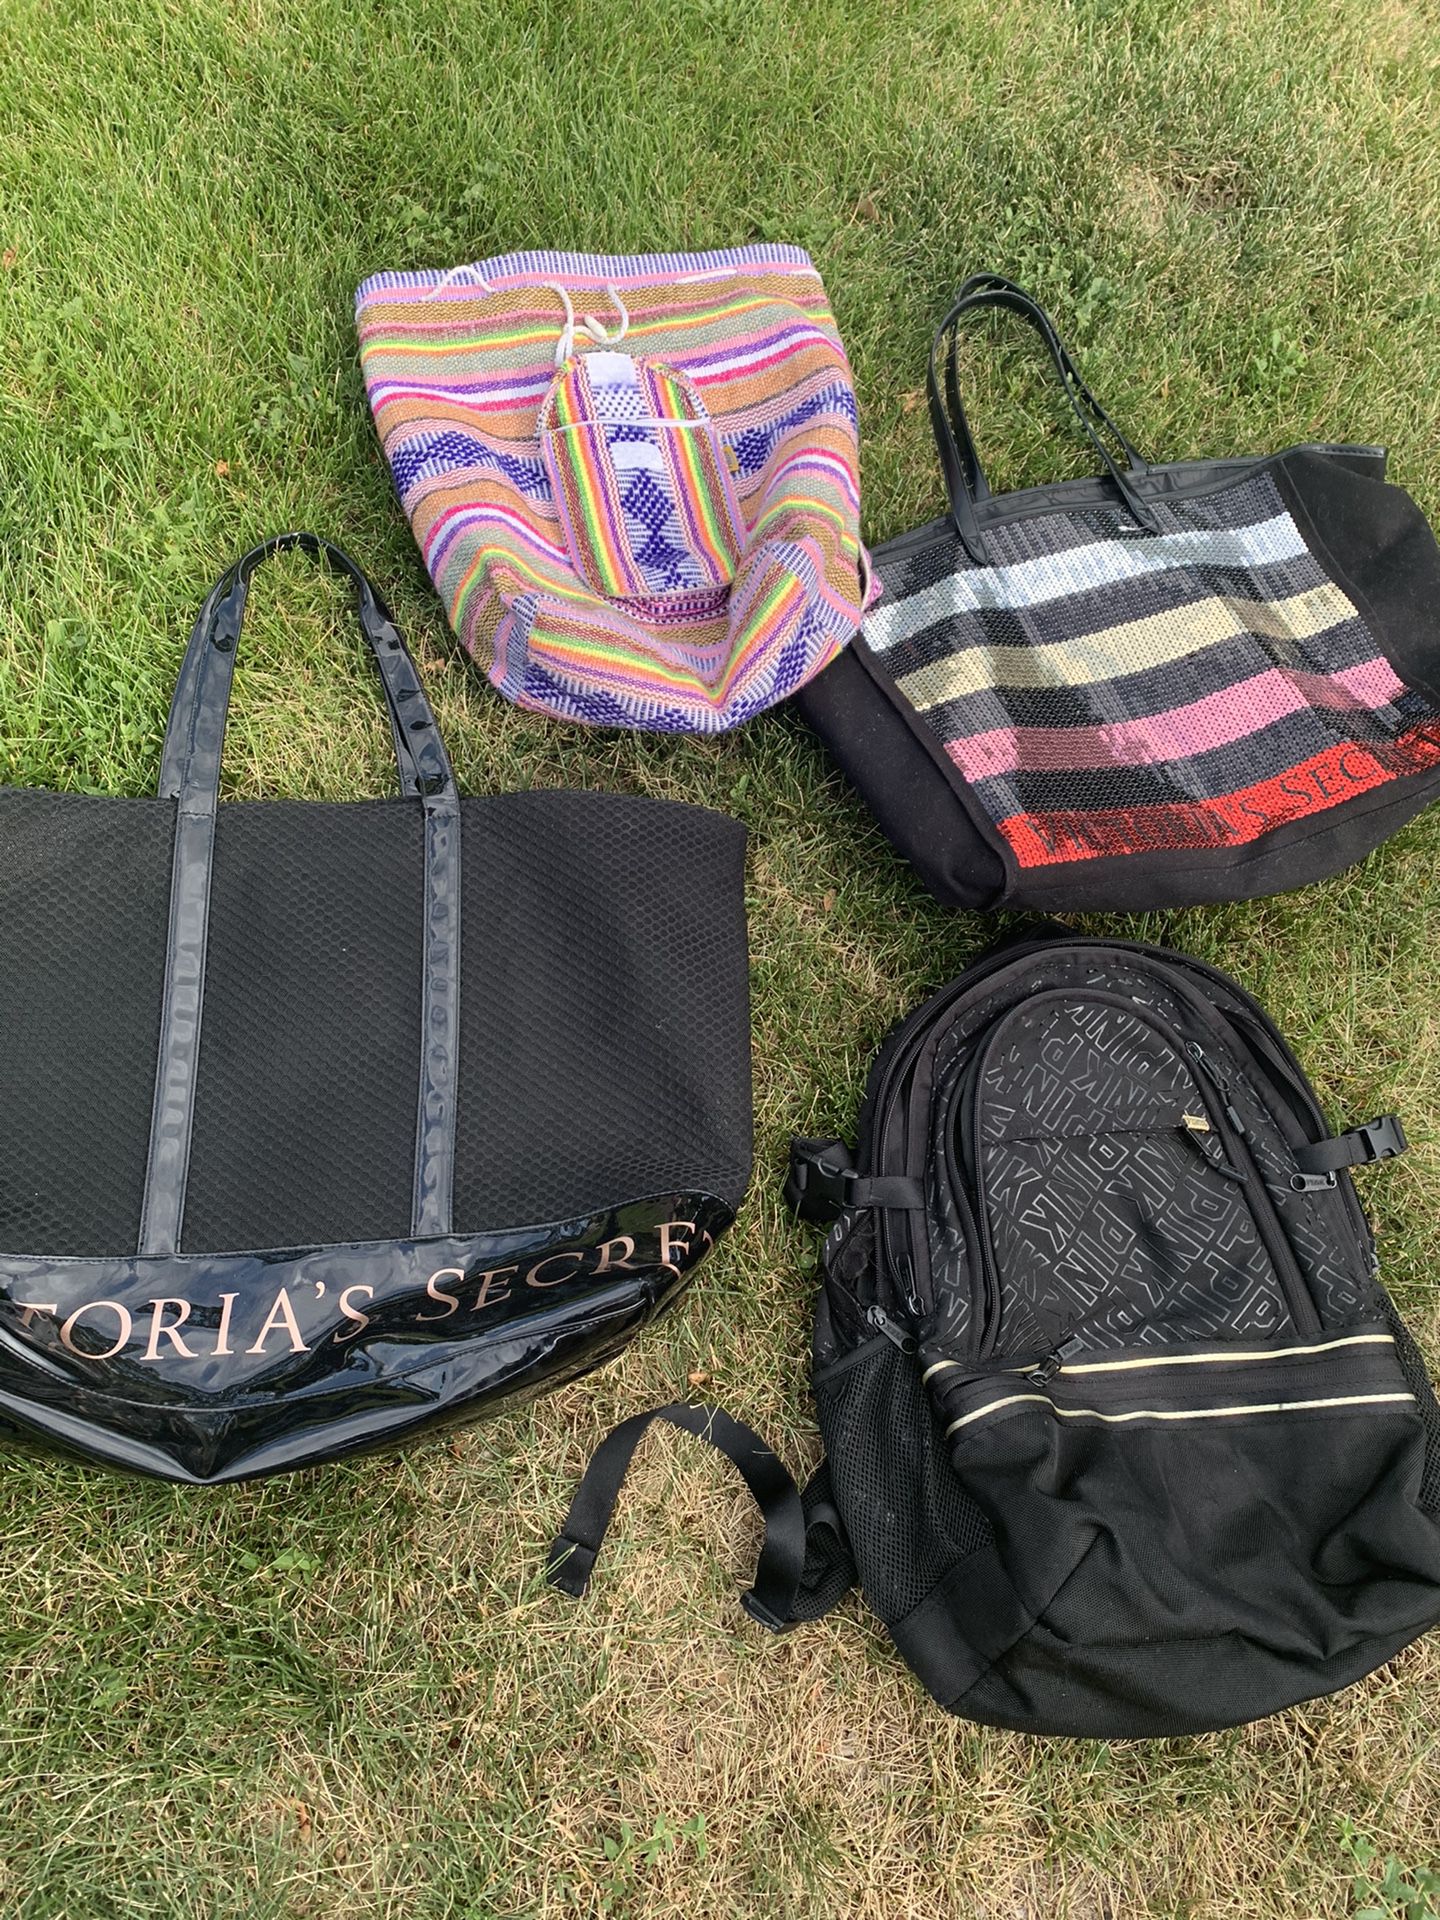 Victoria’s Secret bags and Pink backpack